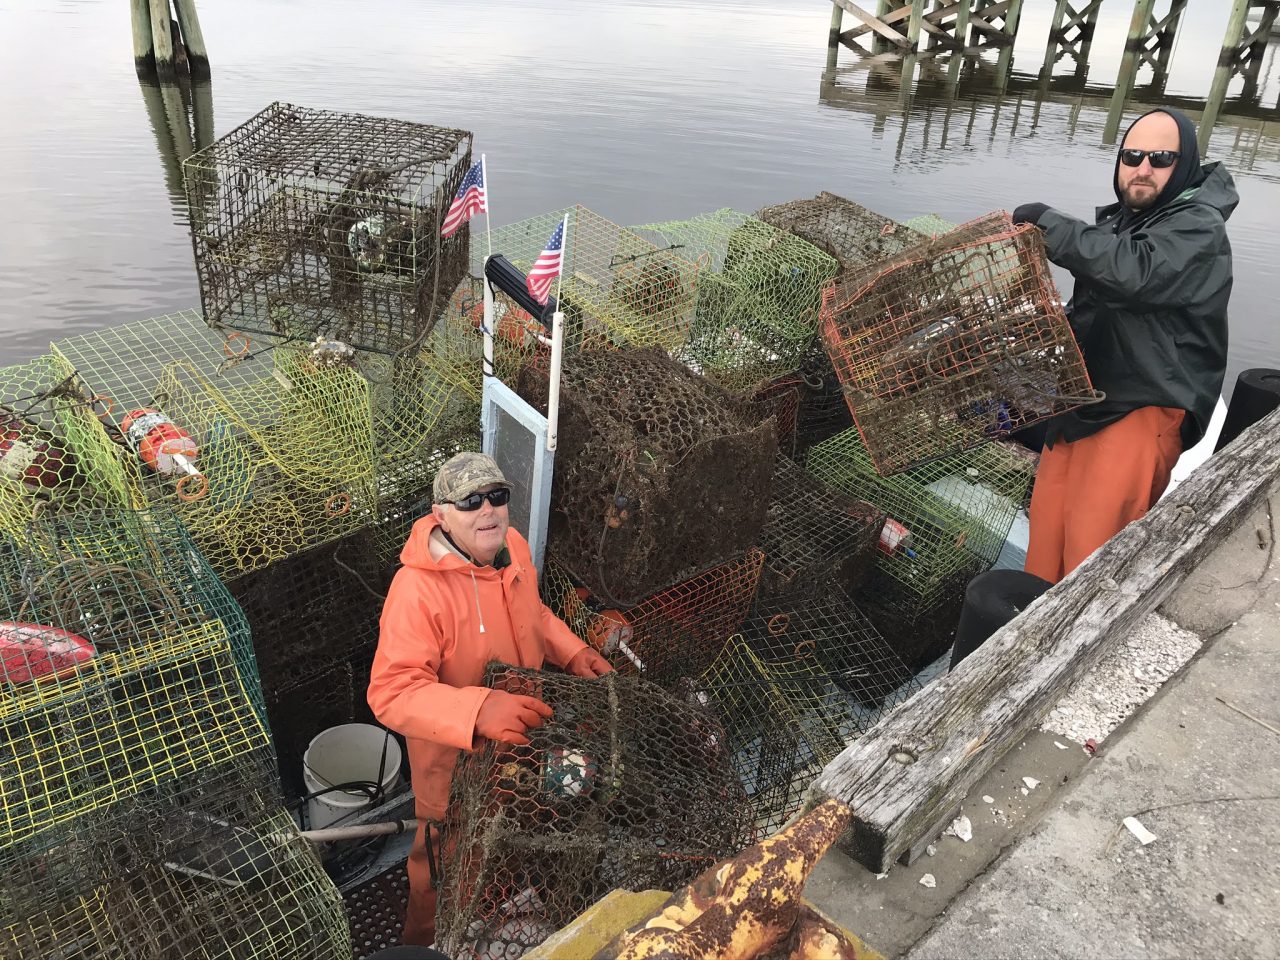 Non-profit fears end of funding to recycle used fishing gear in